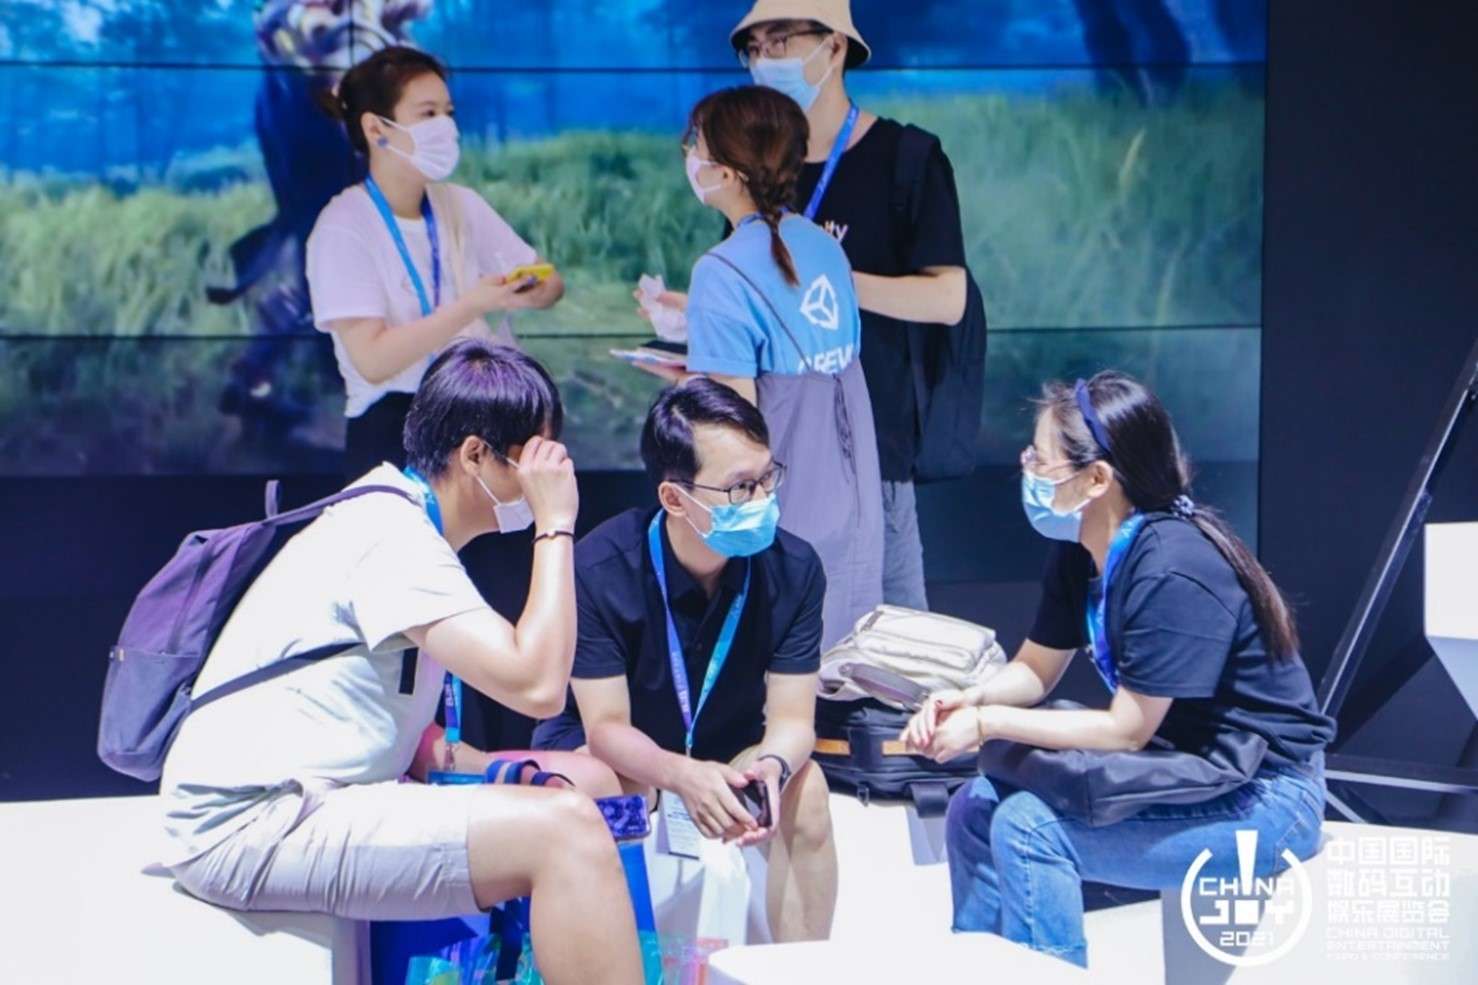 ChinaJoy 2023 attracts the attention of top game makers